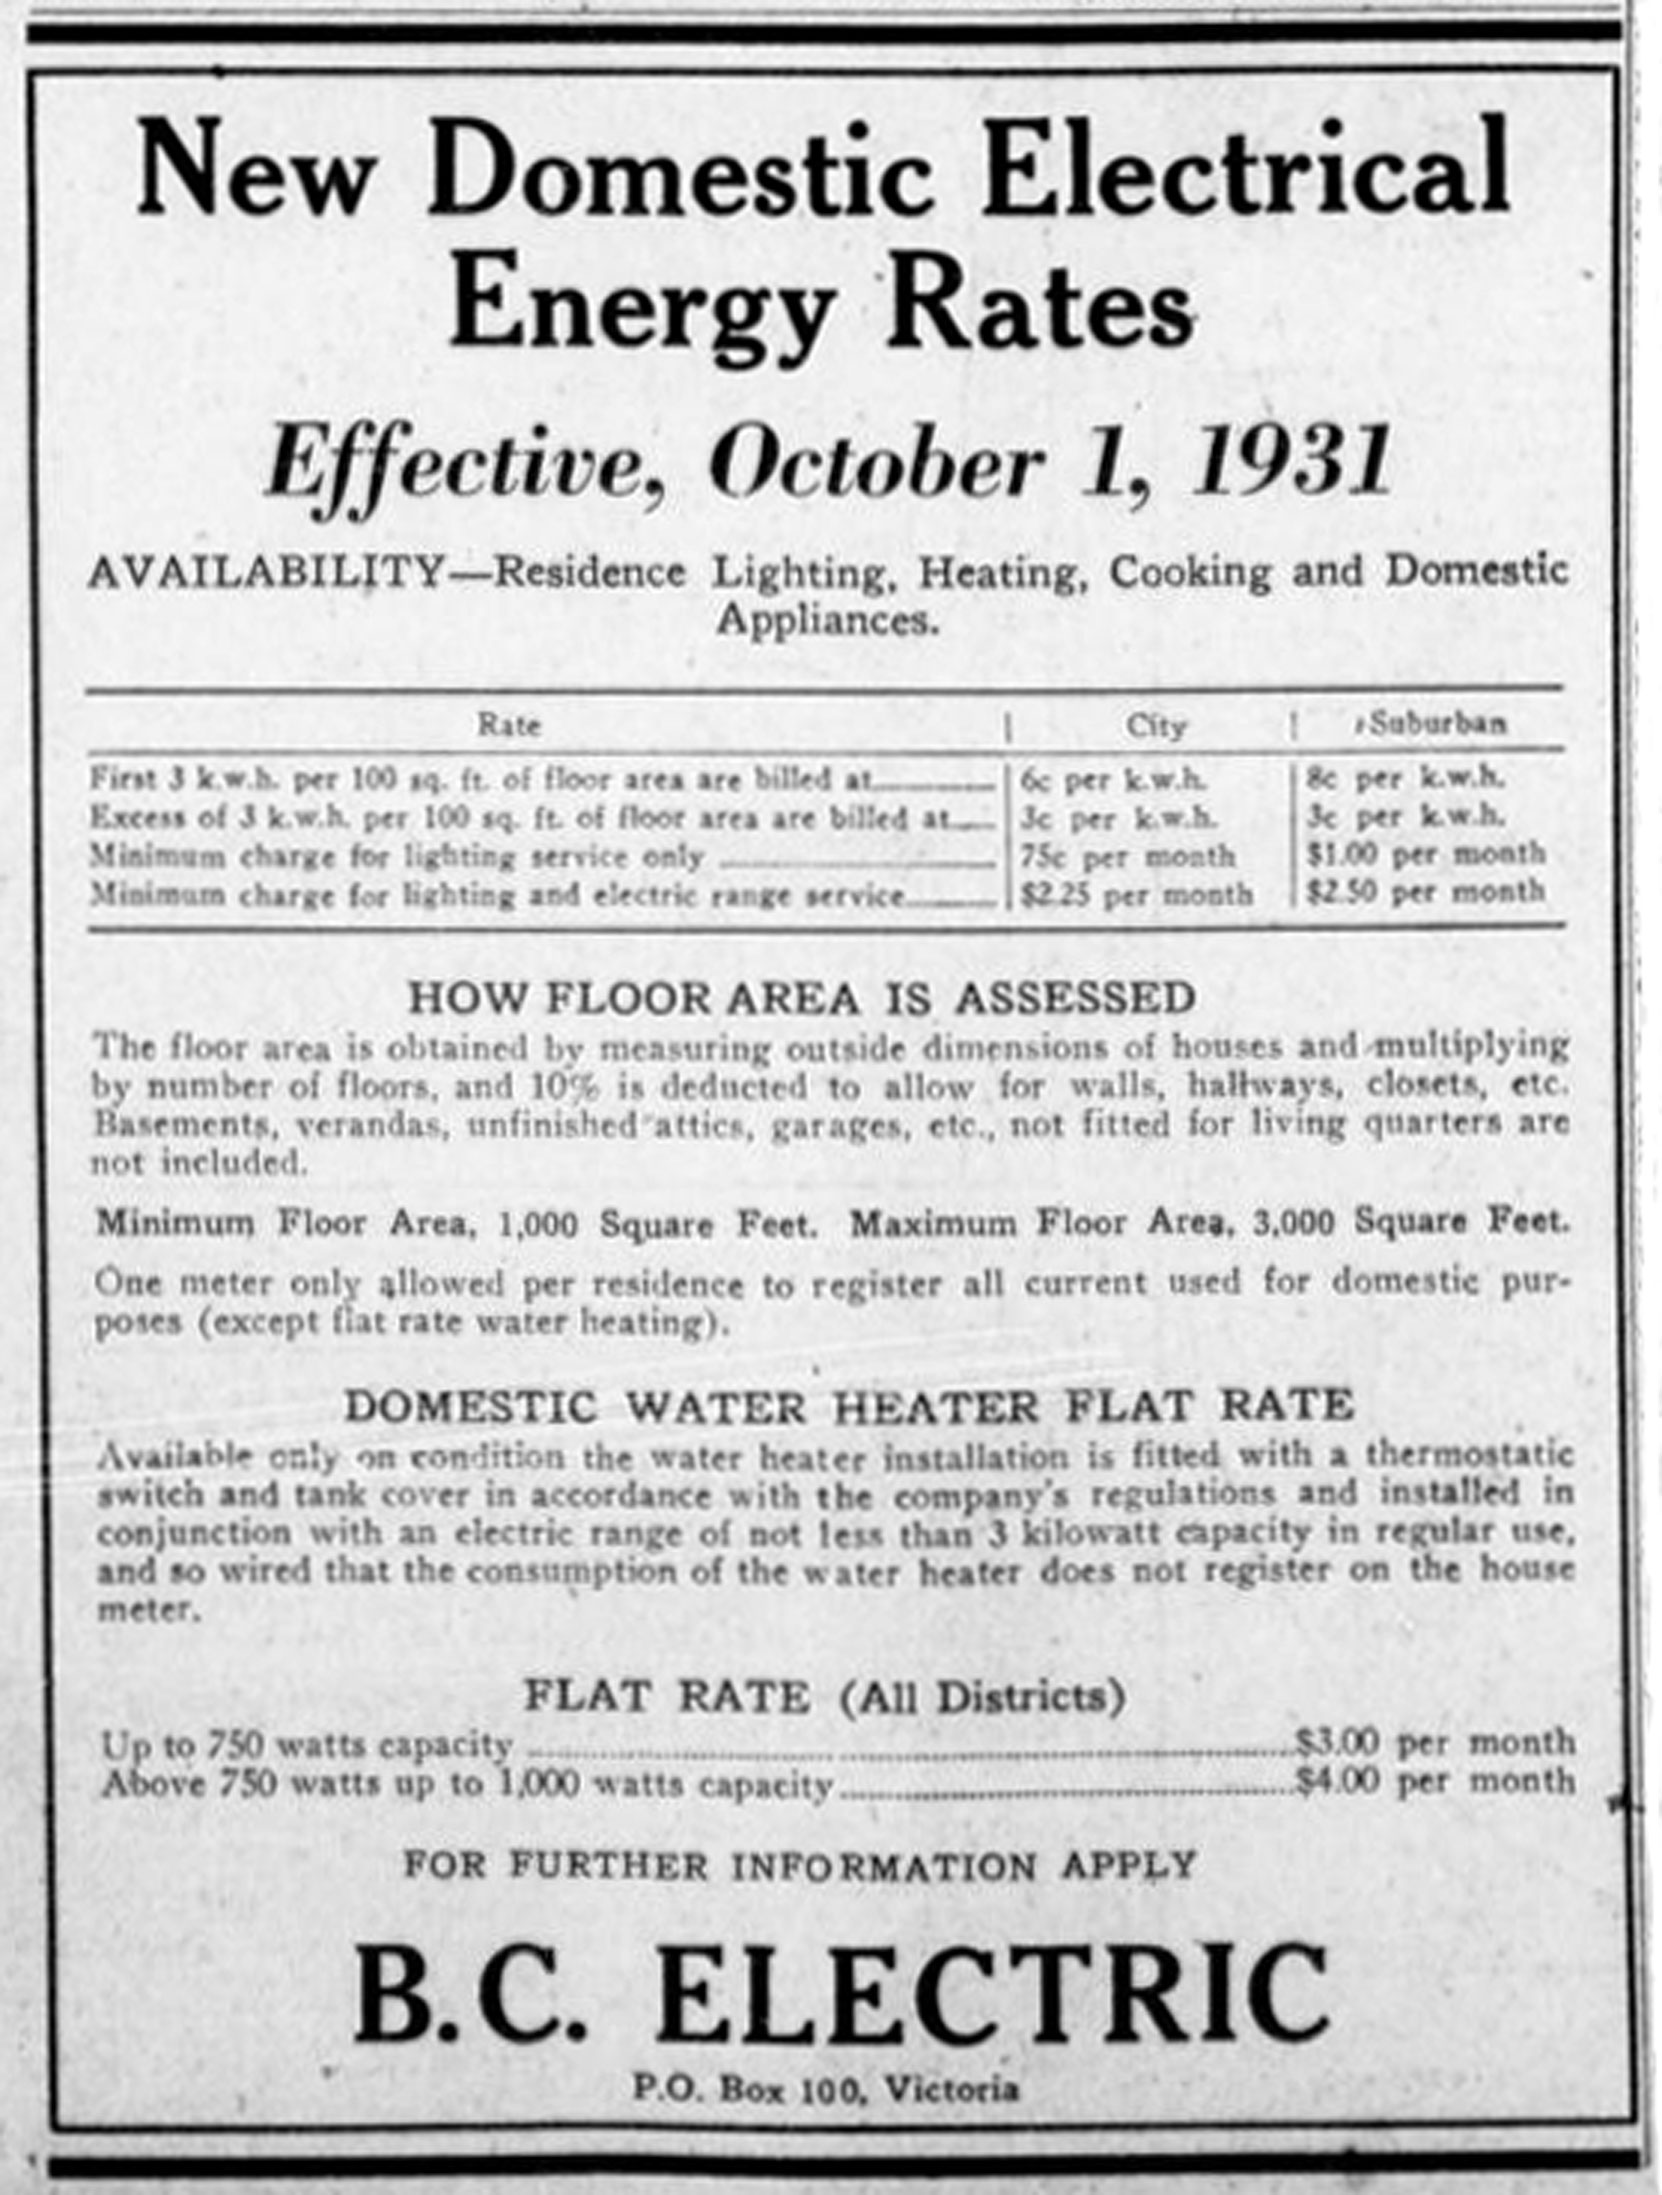 1931 advertisement for B.C. Electric showing household electricity rates (Victoria Online Sightseeing Tours collection)